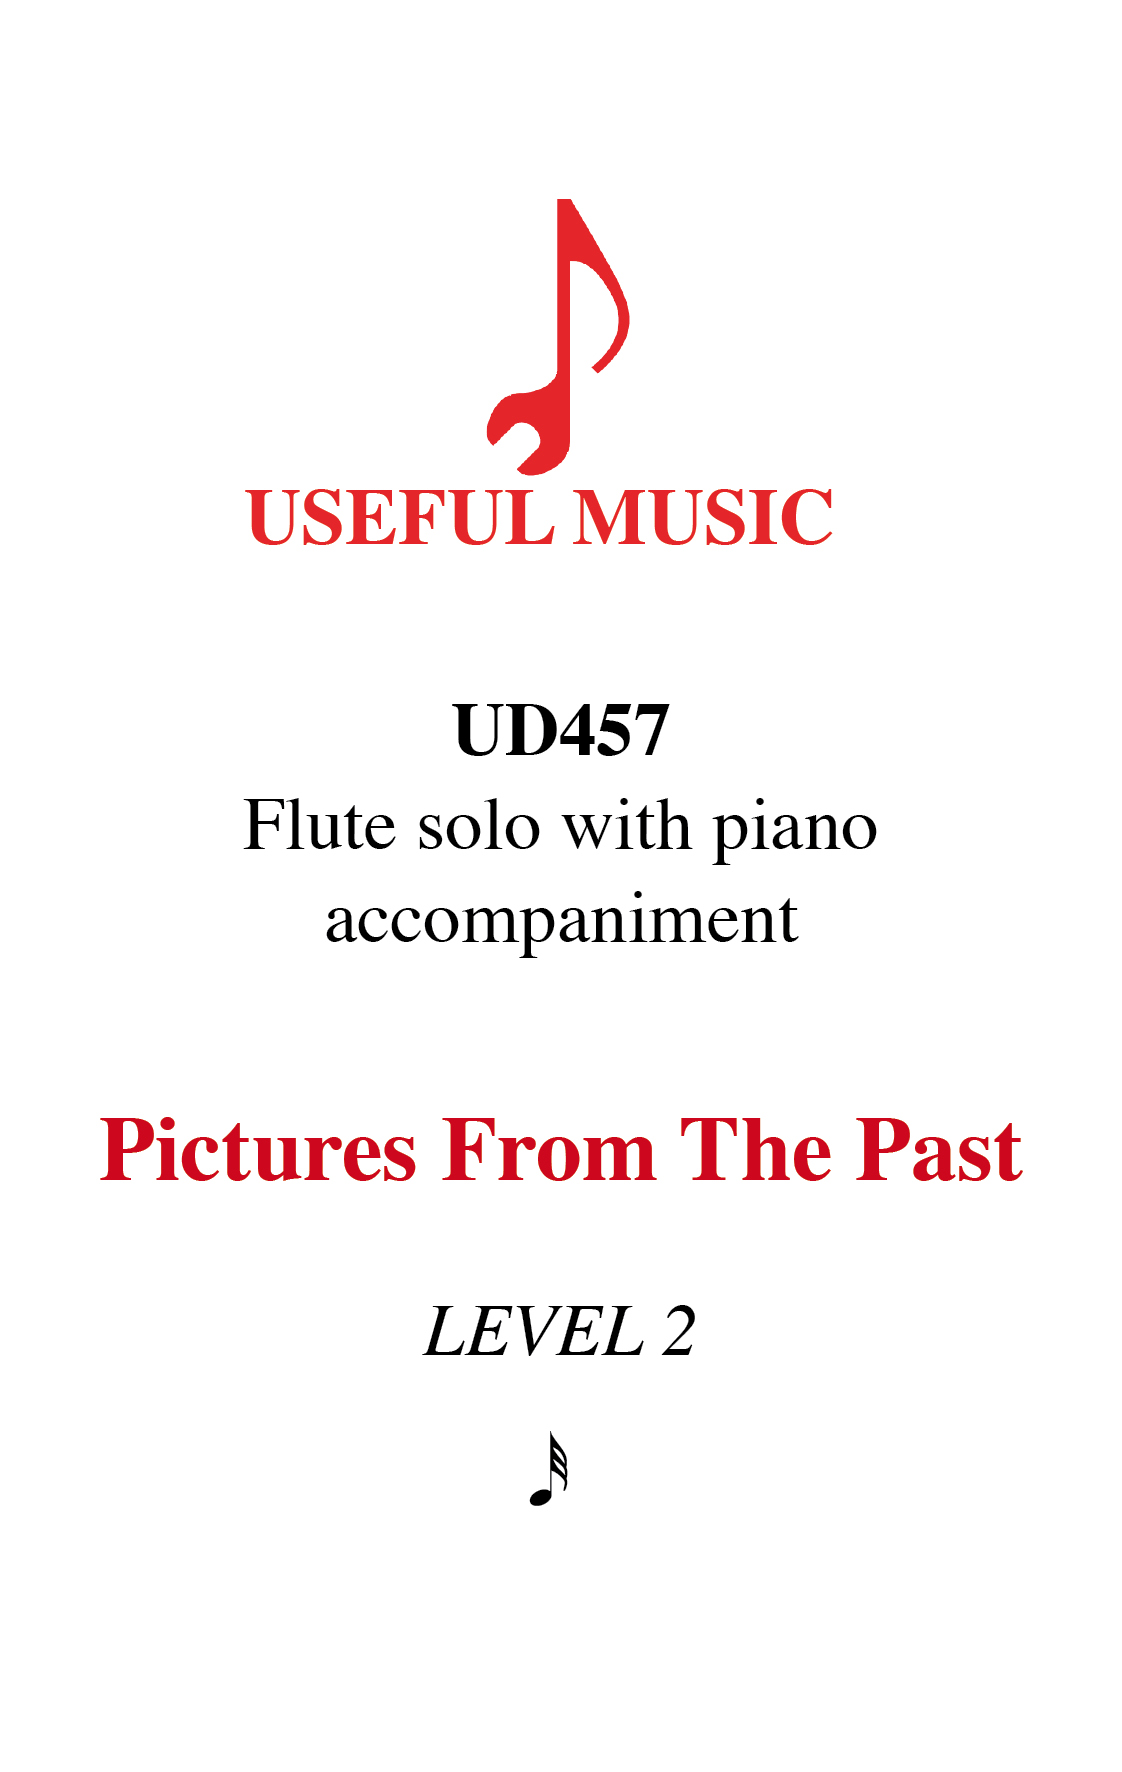 Pictures from the Past - flute with piano accompaniment